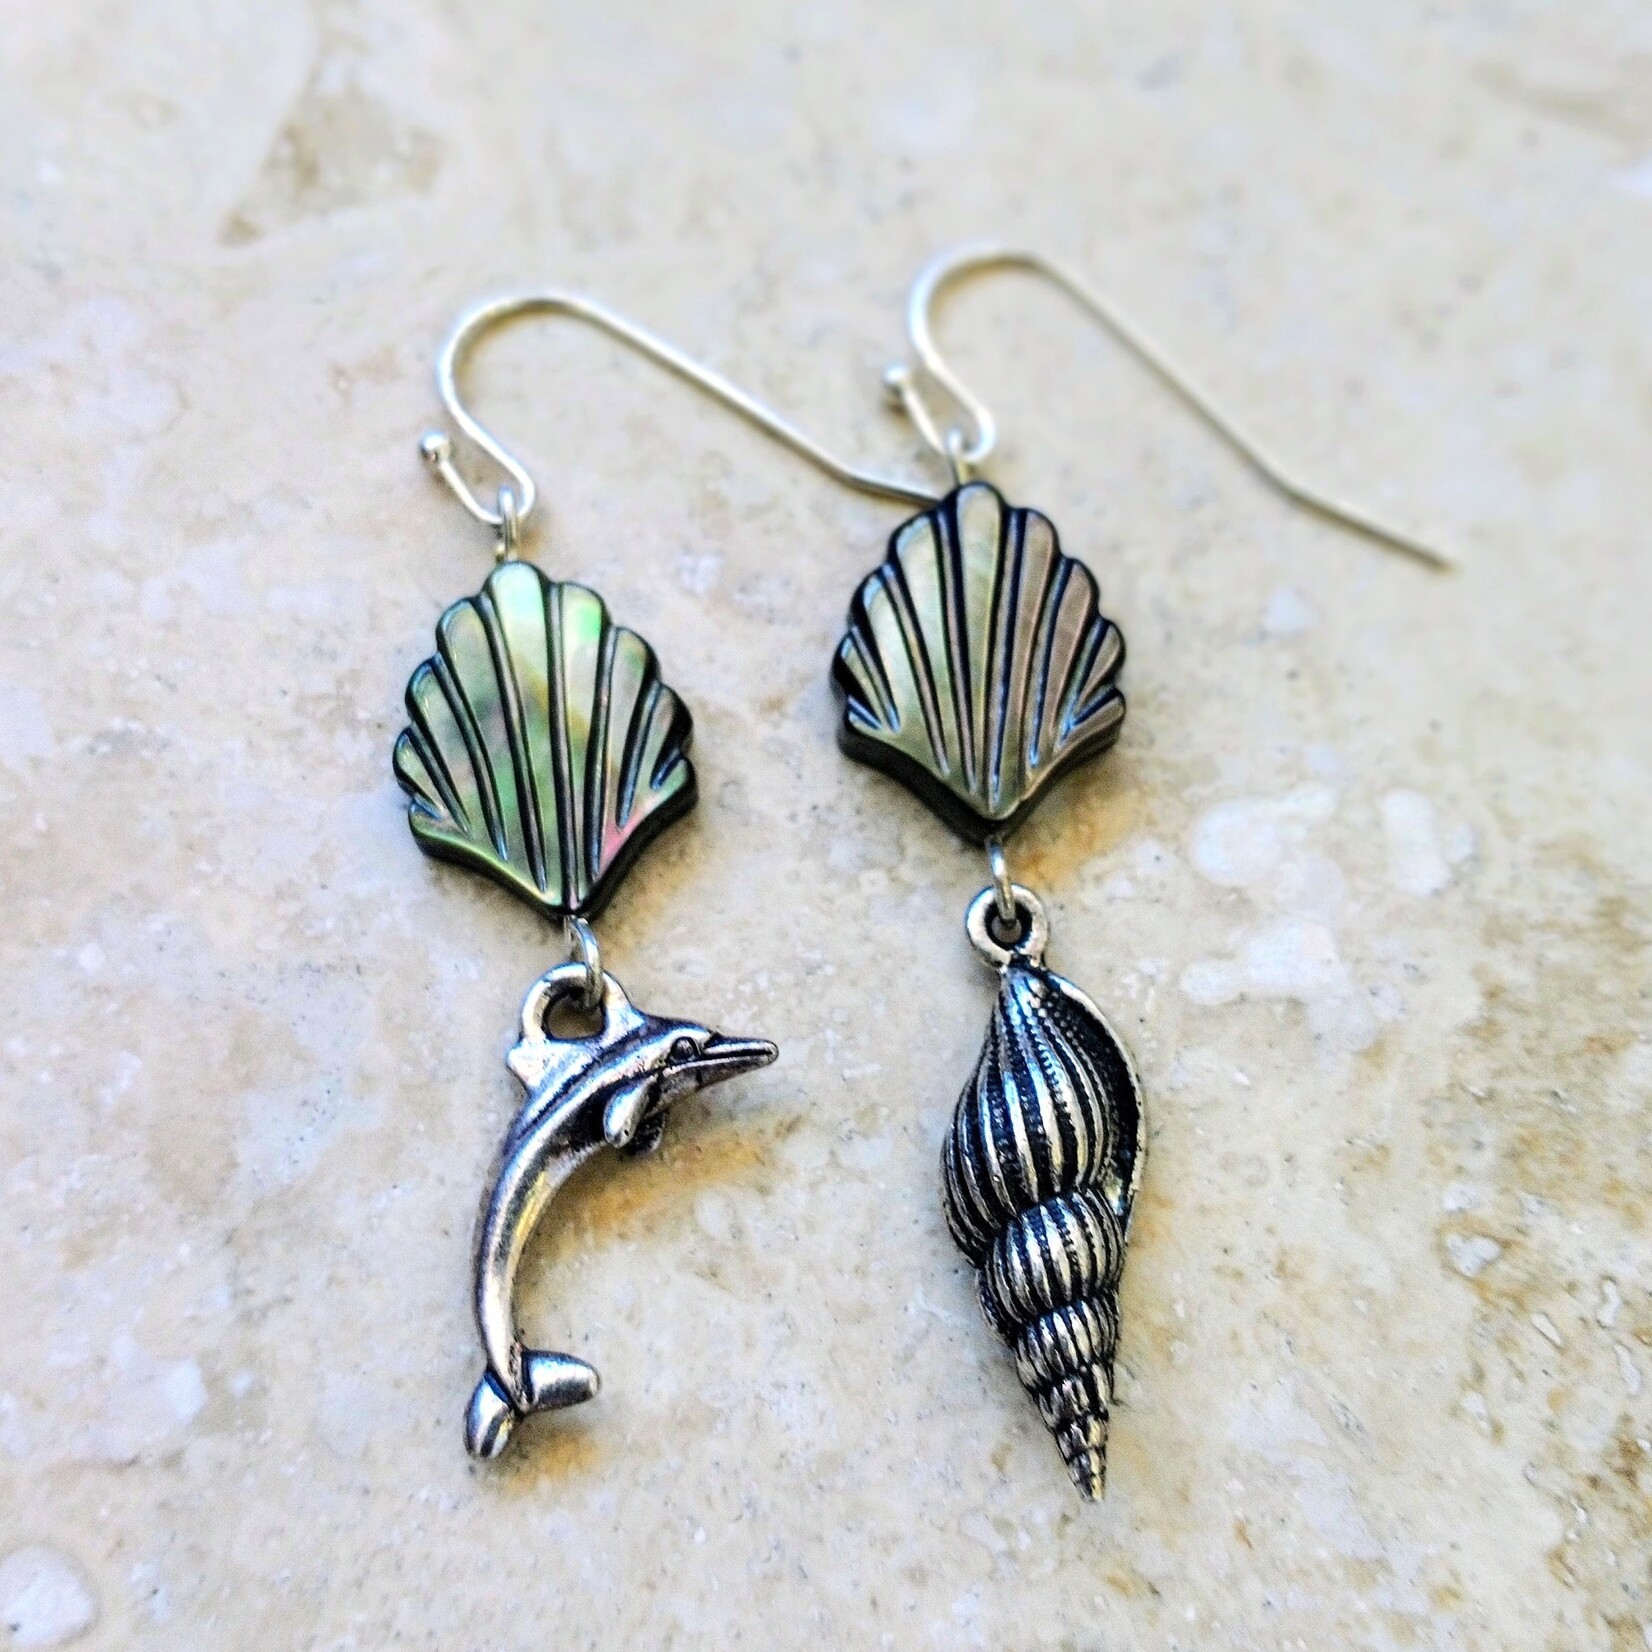 Dolphin Playing Earrings - Ready to Wear